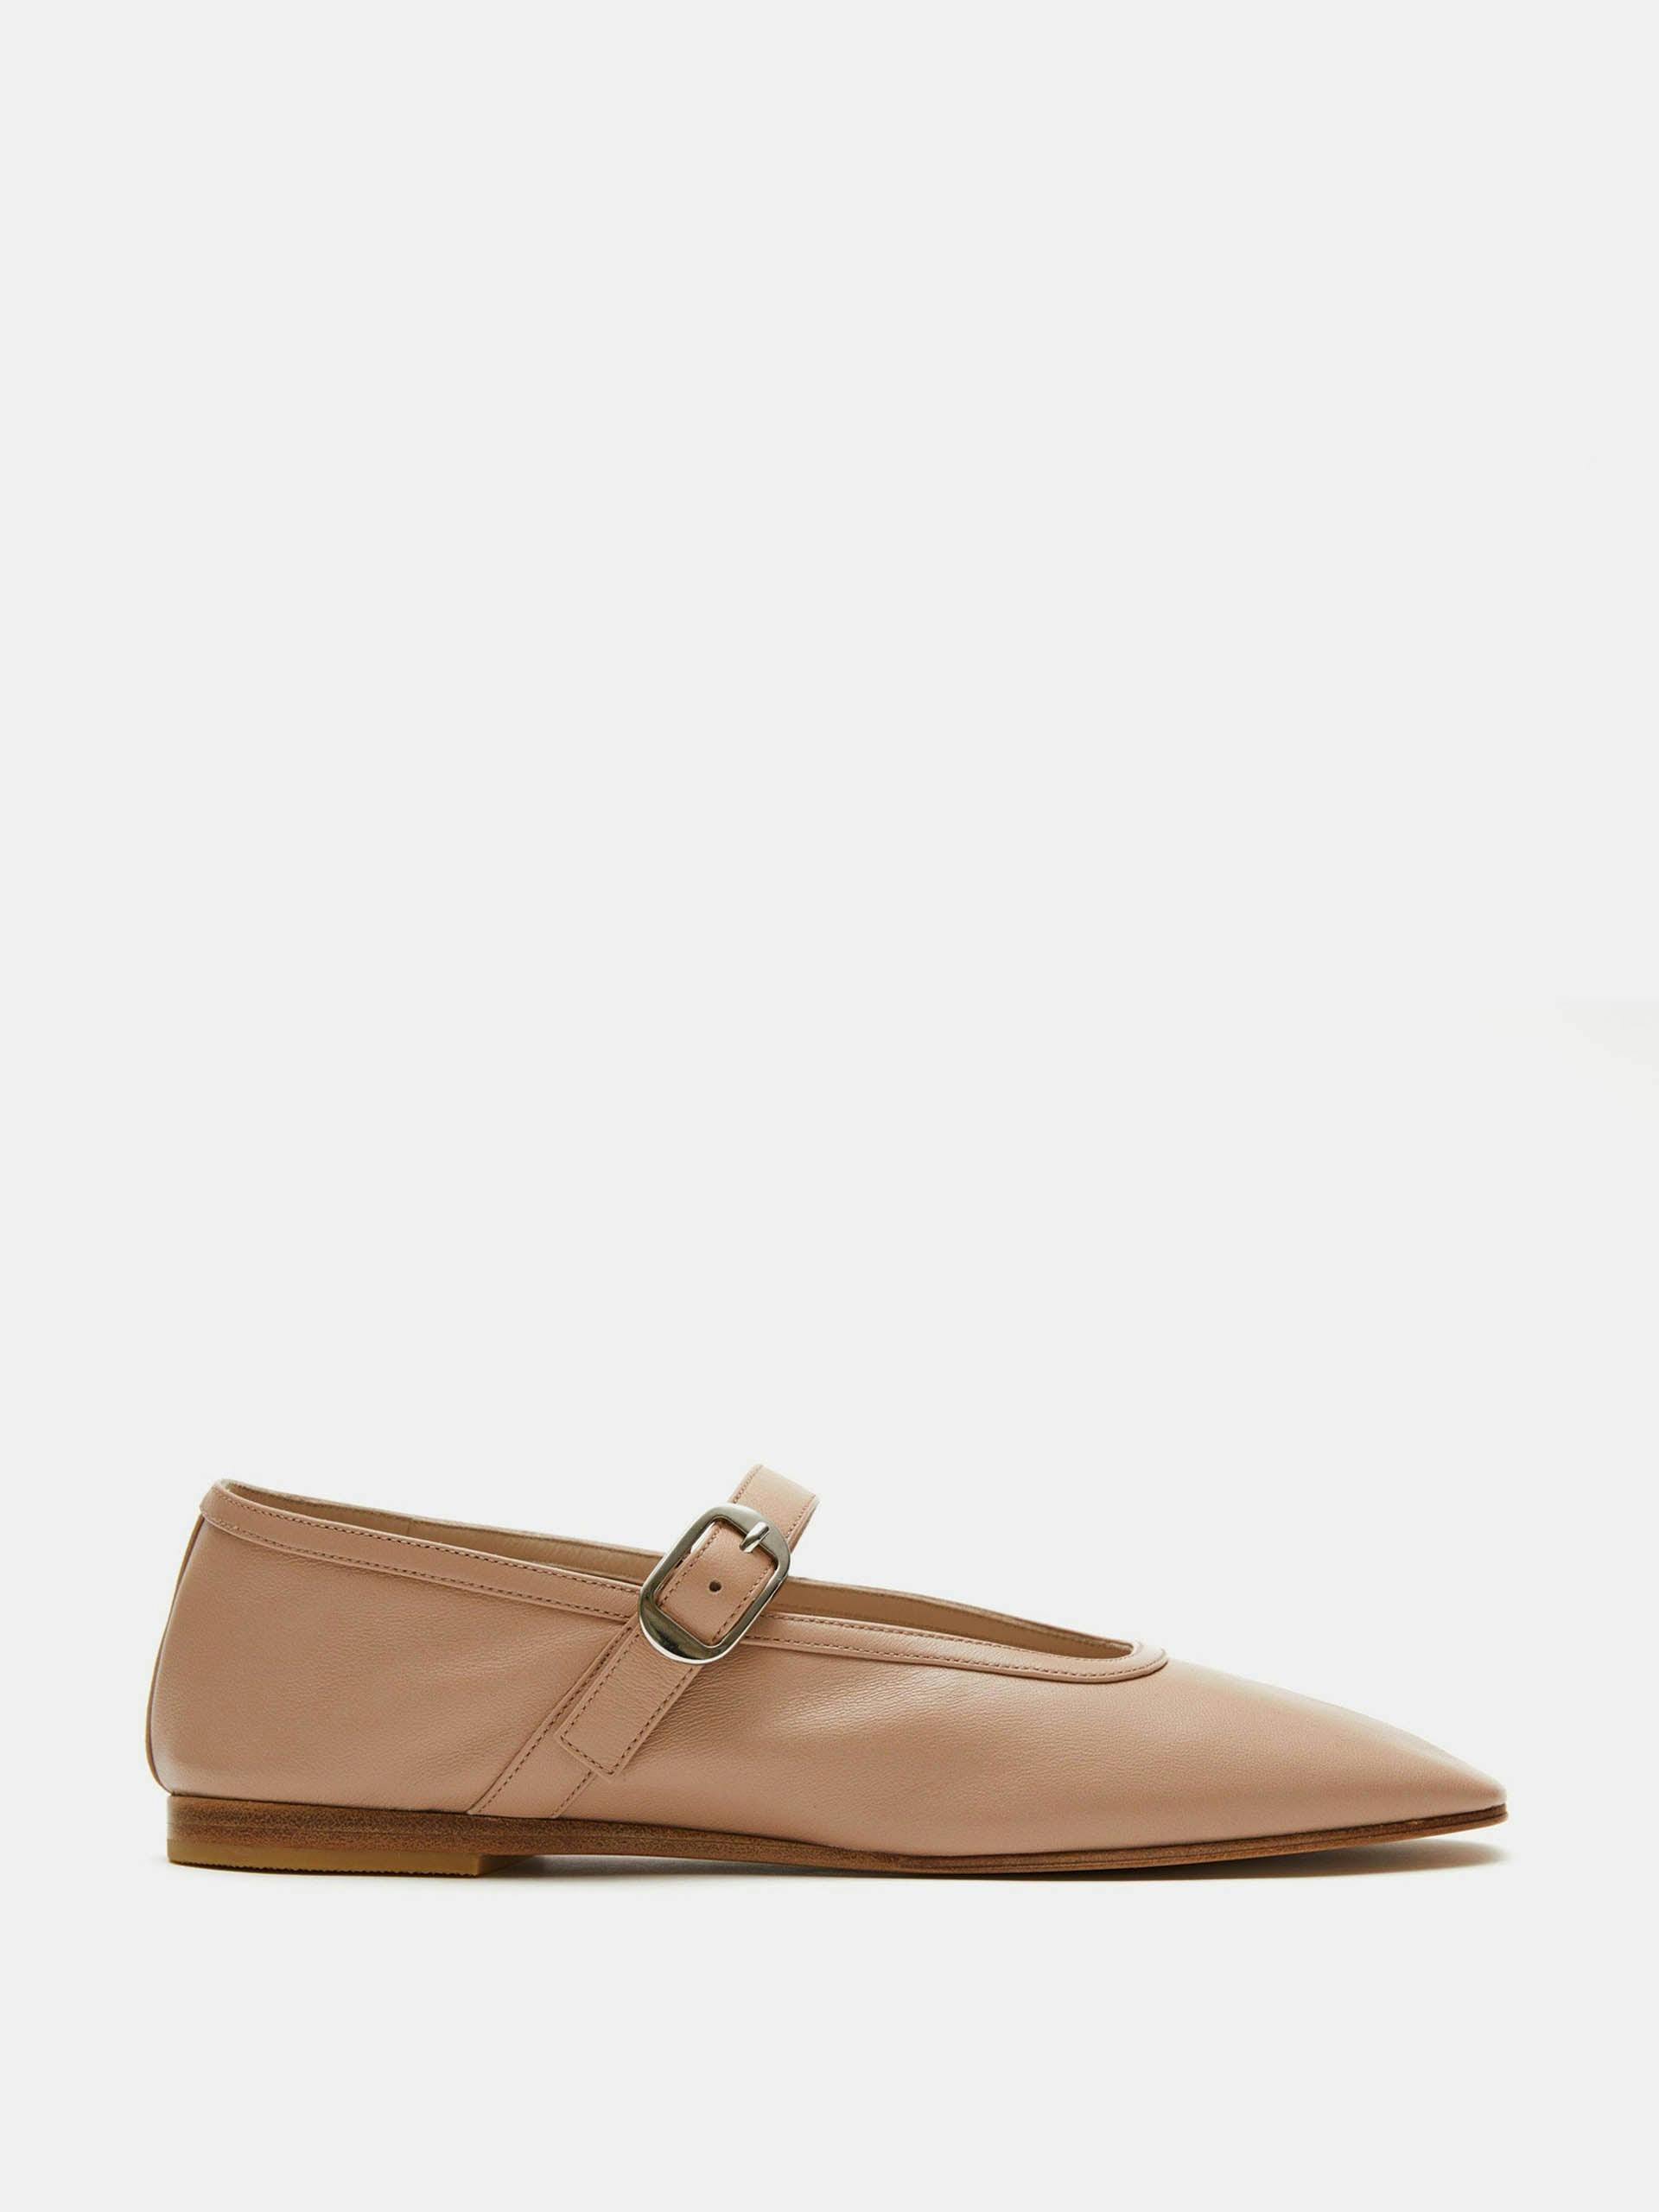 Fawn leather ballet mary jane flats